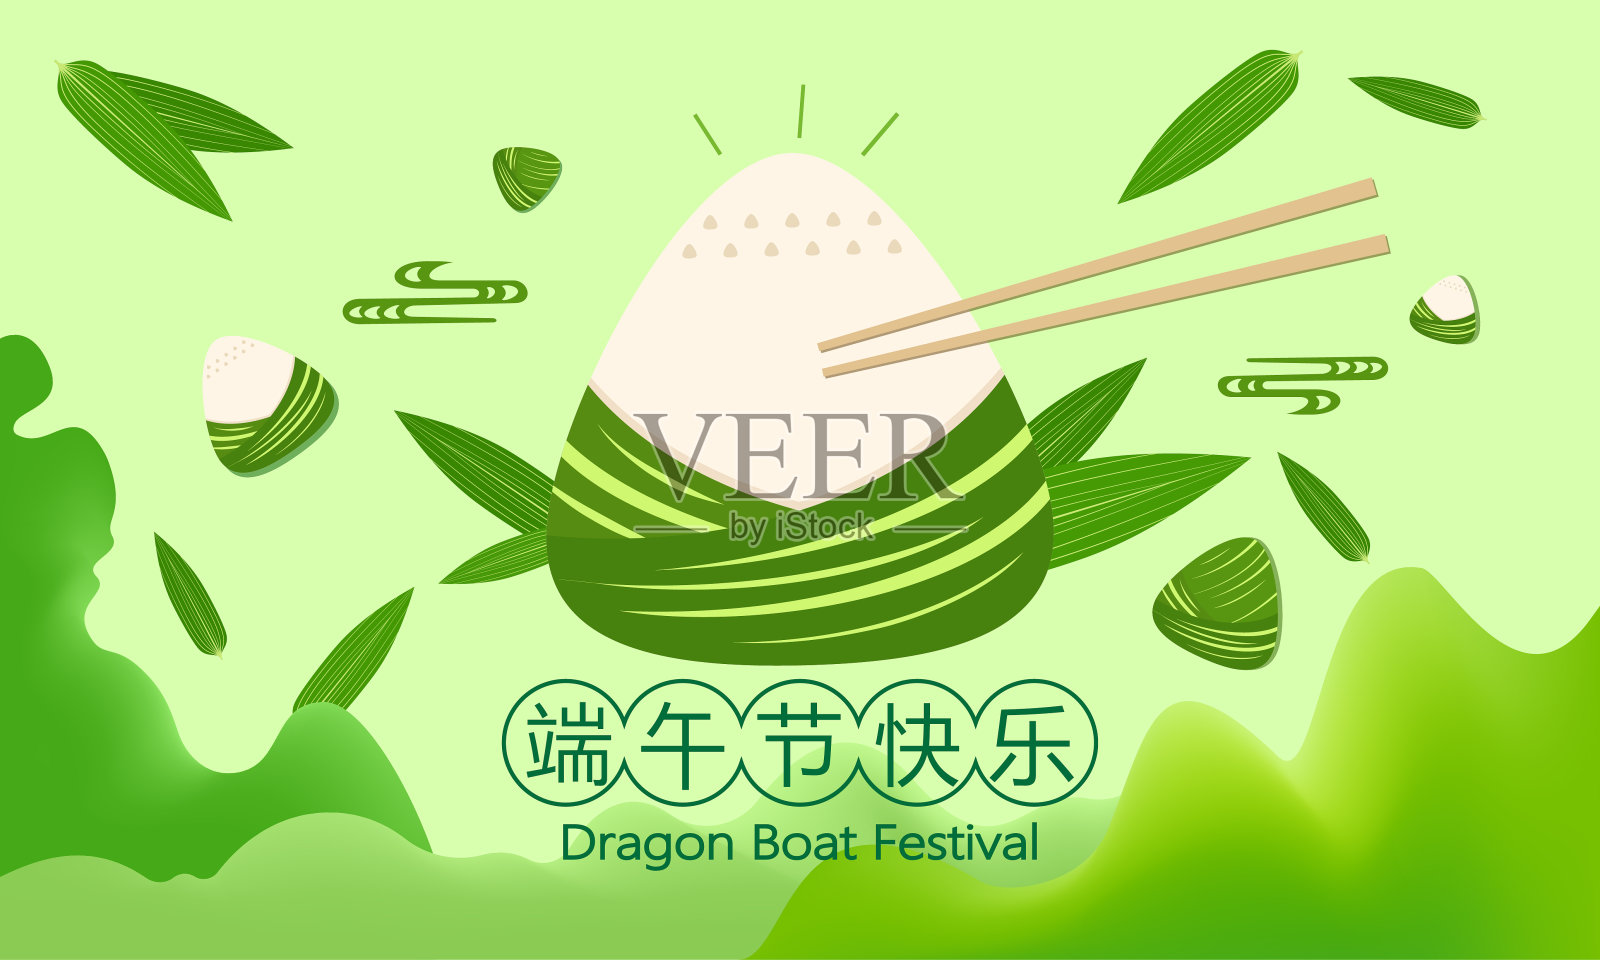 Dragon Boat Festival vector flat style illustration, Chinese traditional festival - Dragon Boat Festival设计模板素材